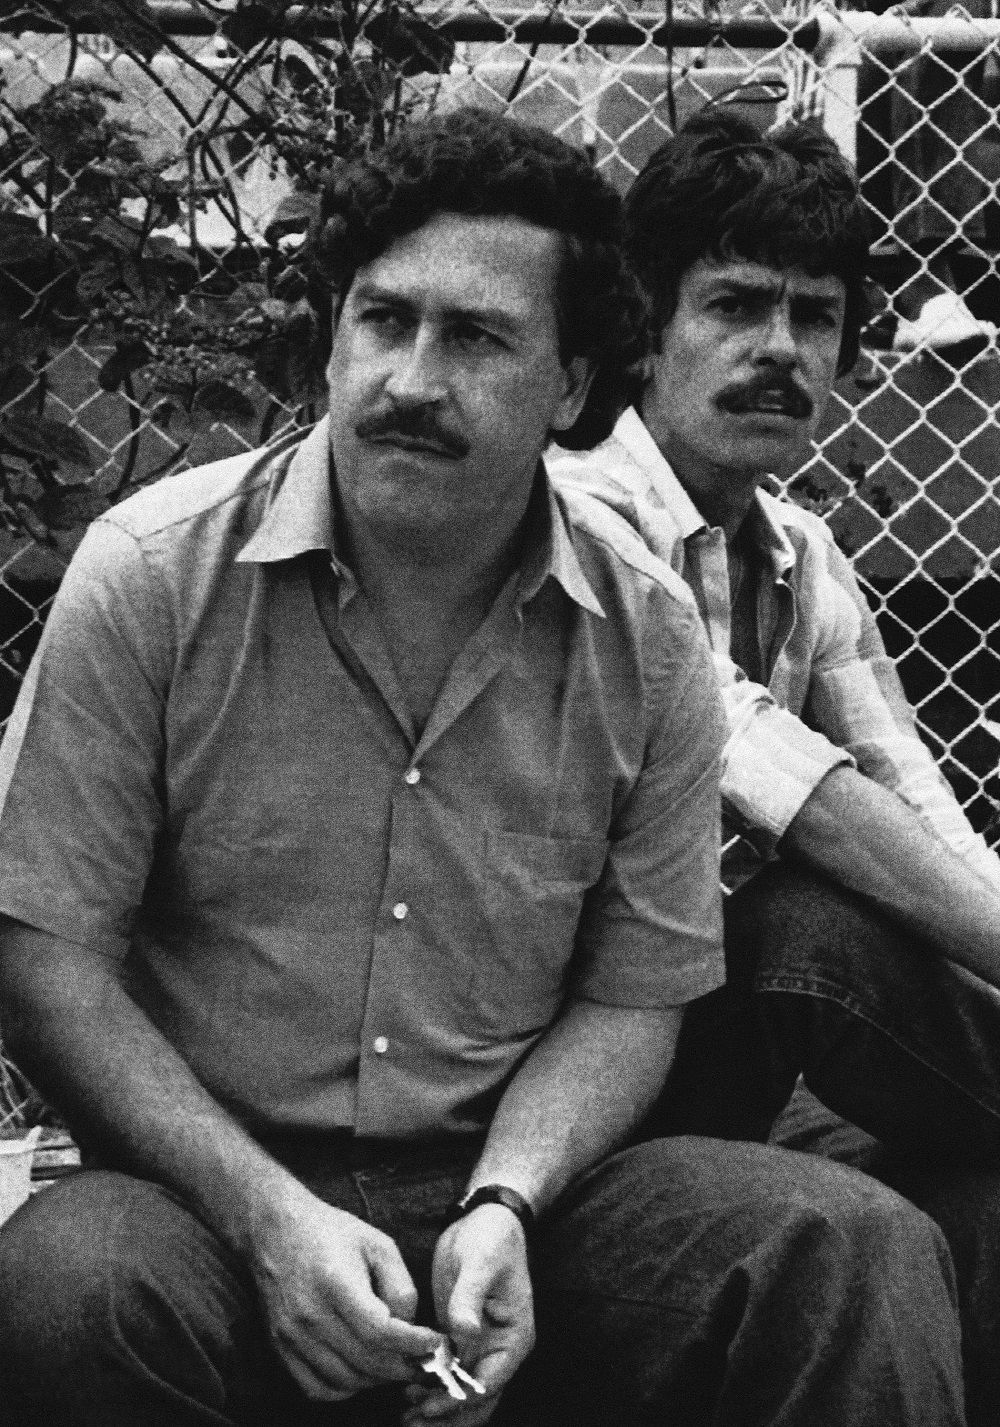 Pablo Escobar's legacy 25 years on: Tributes and disgust. News